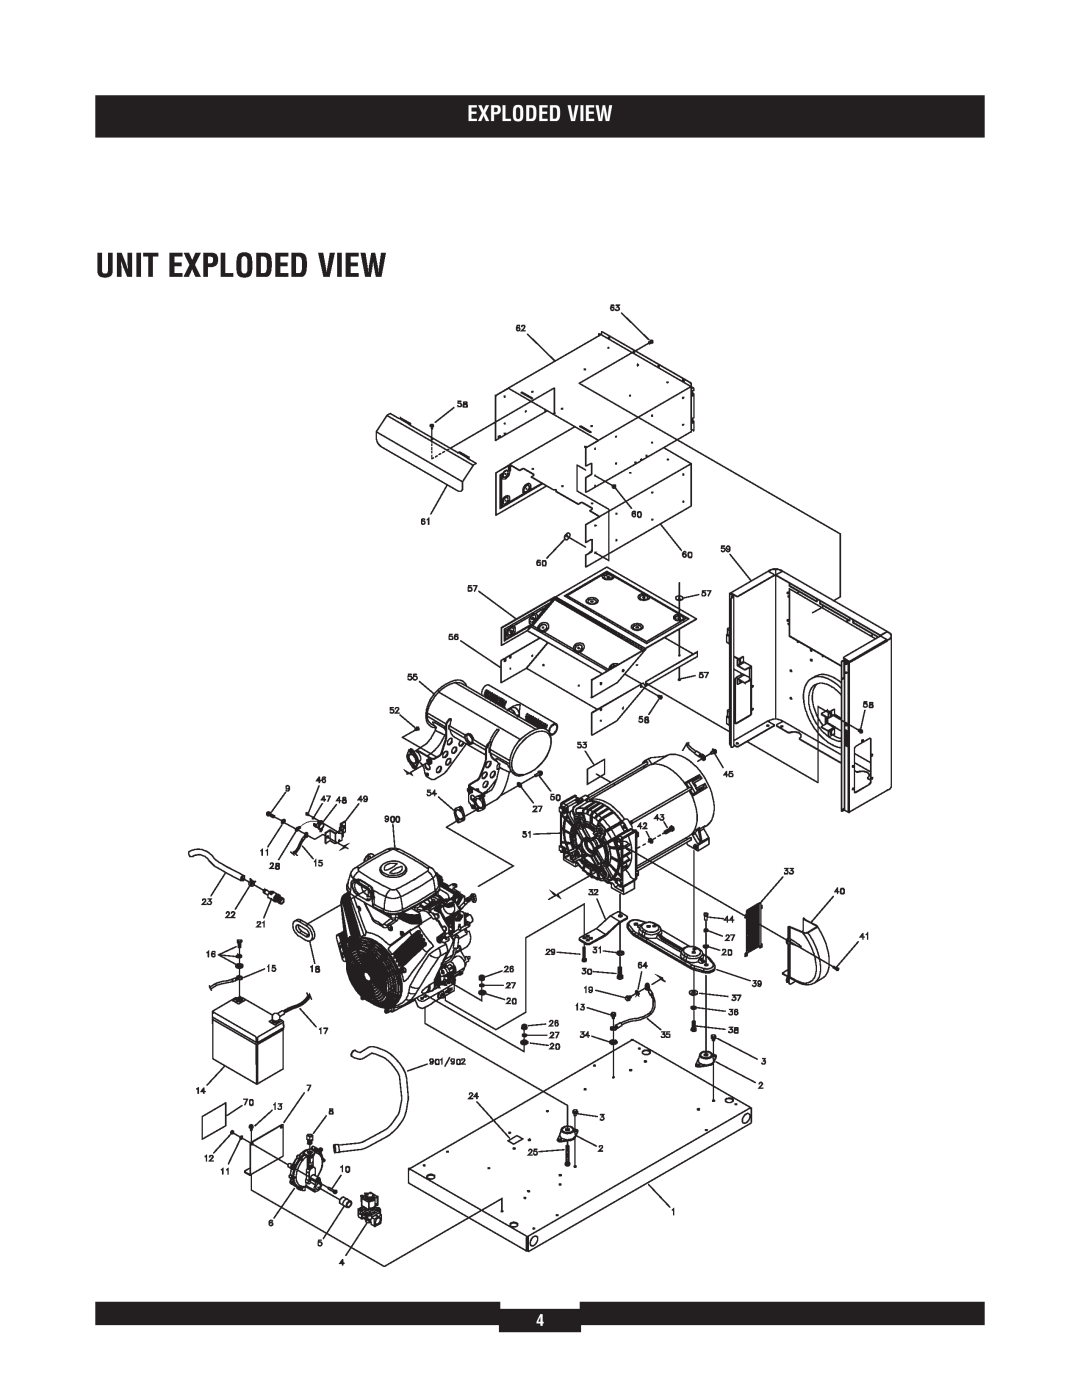 Briggs & Stratton 40211 manual Unit Exploded View 